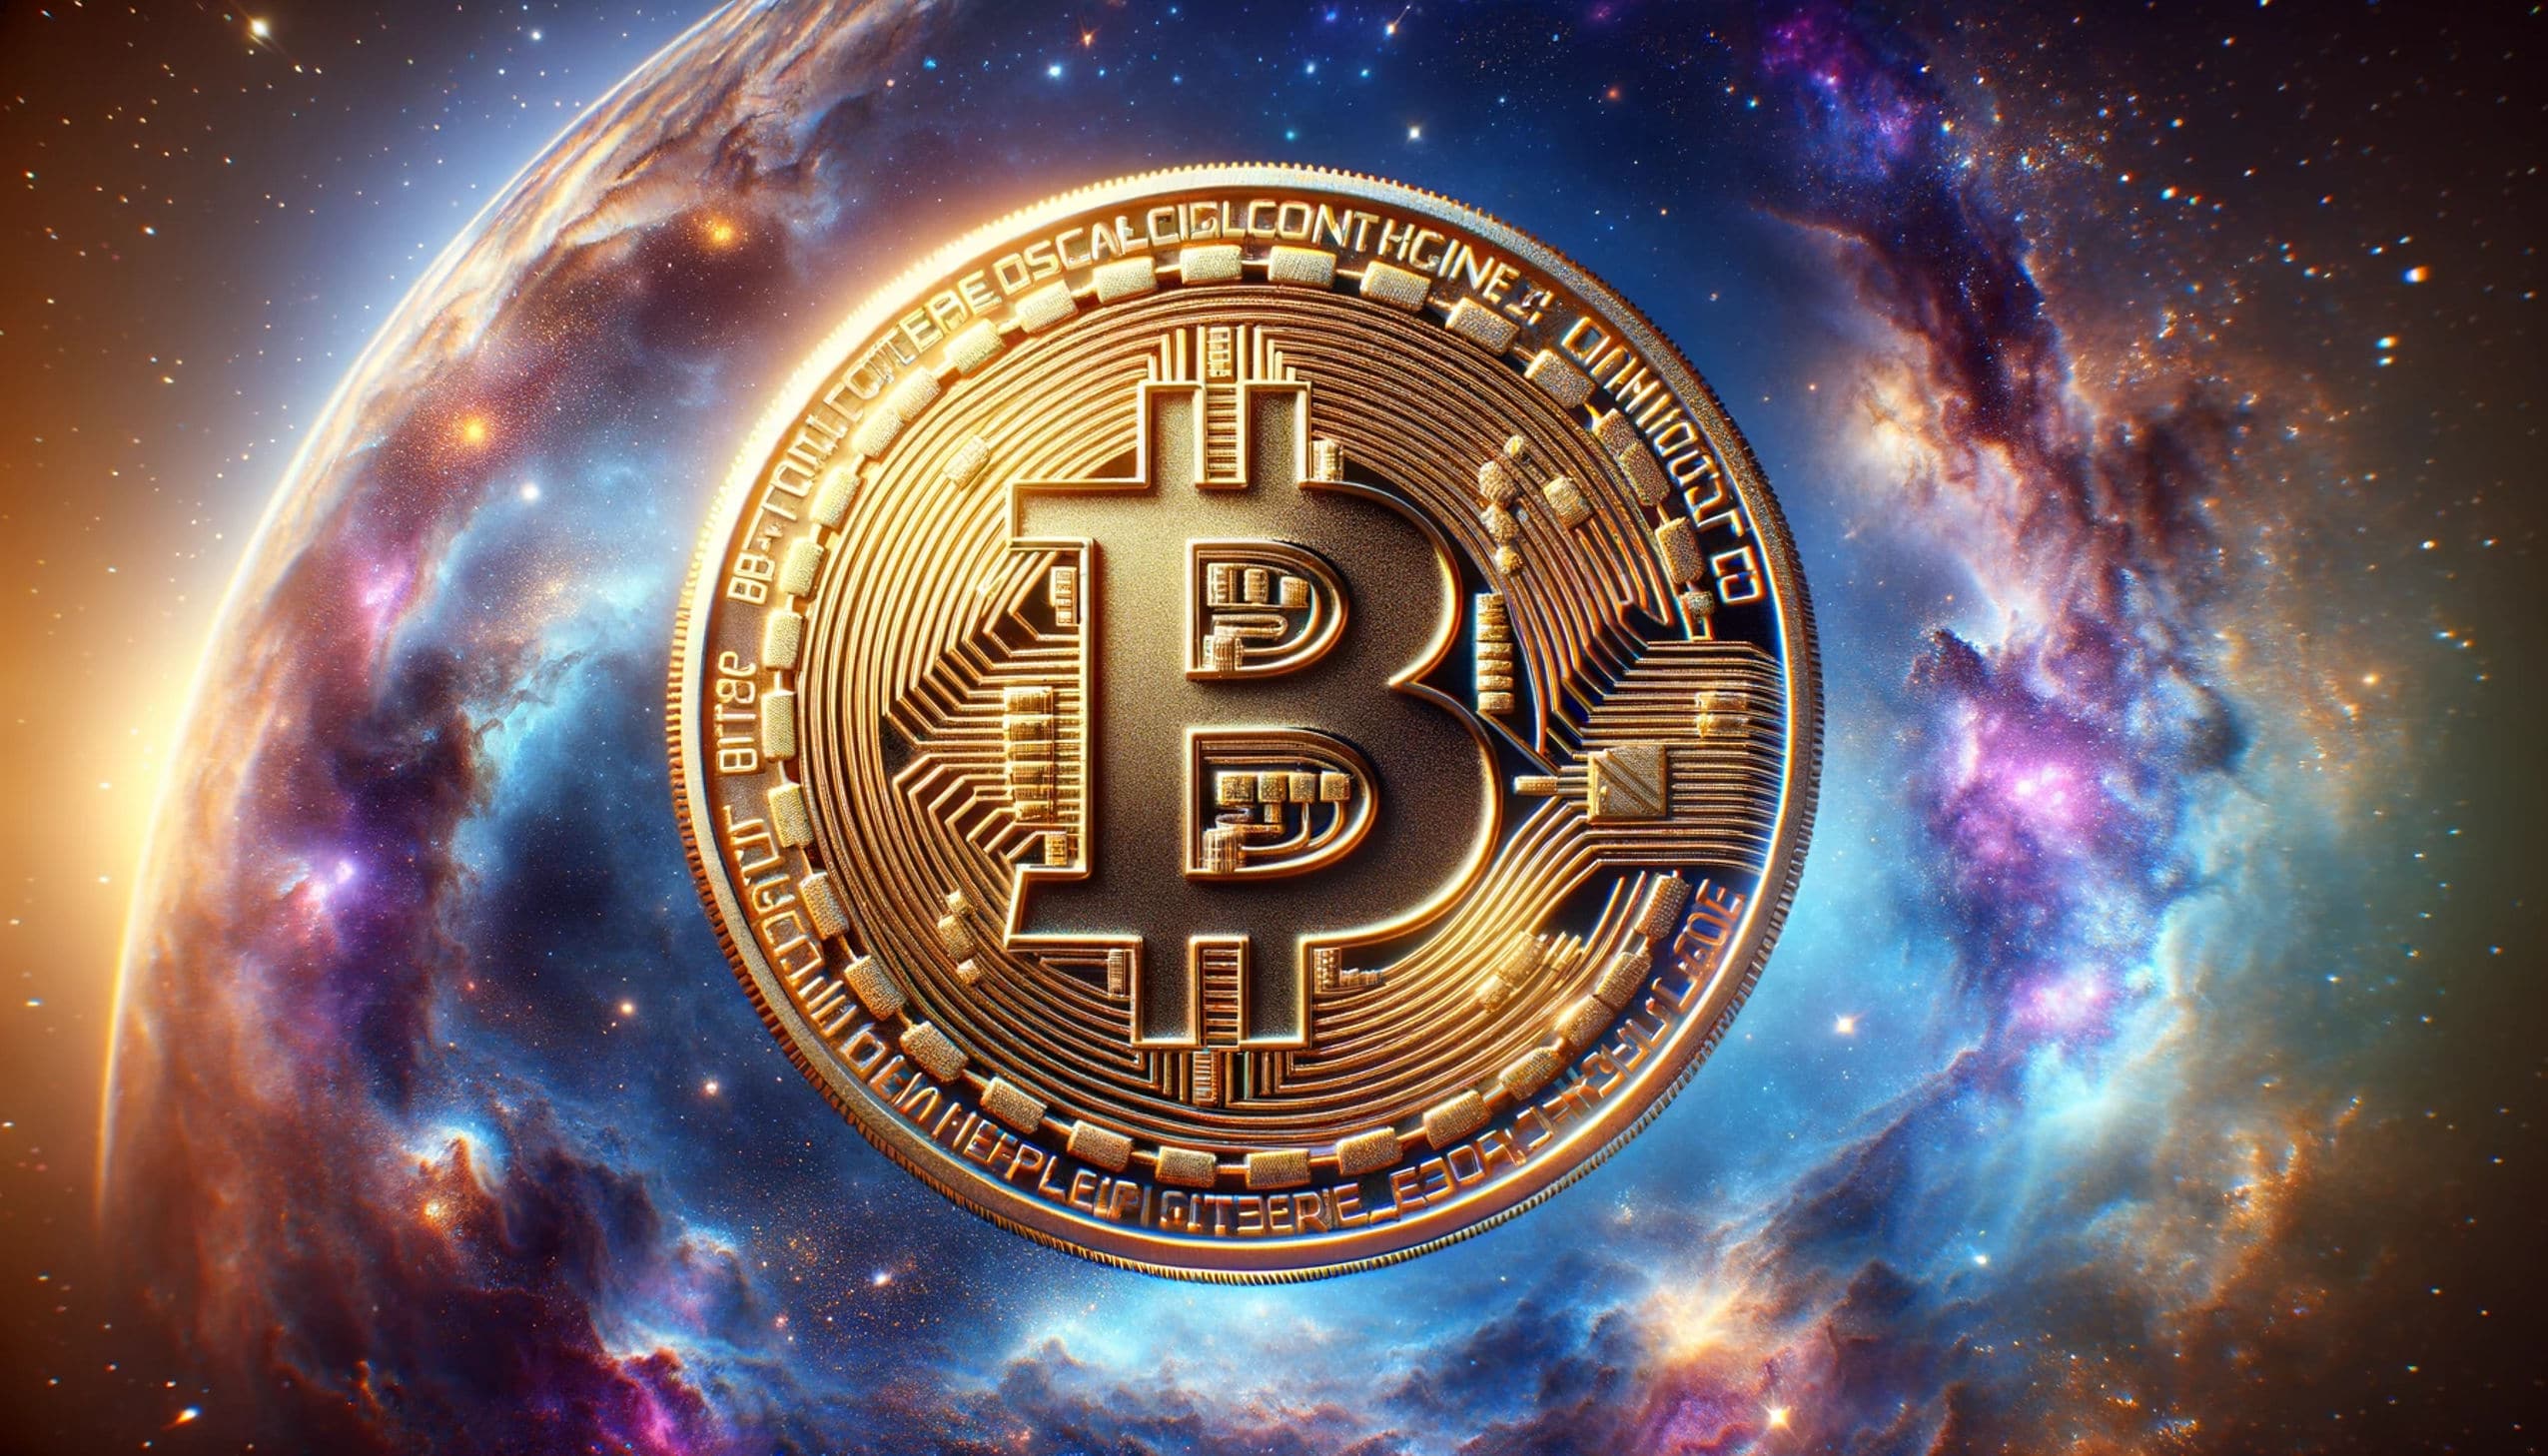 The image shows a golden Bitcoin with detailed engravings against a backdrop of a colorful galaxy, symbolizing the digital currency's futuristic aspirations.